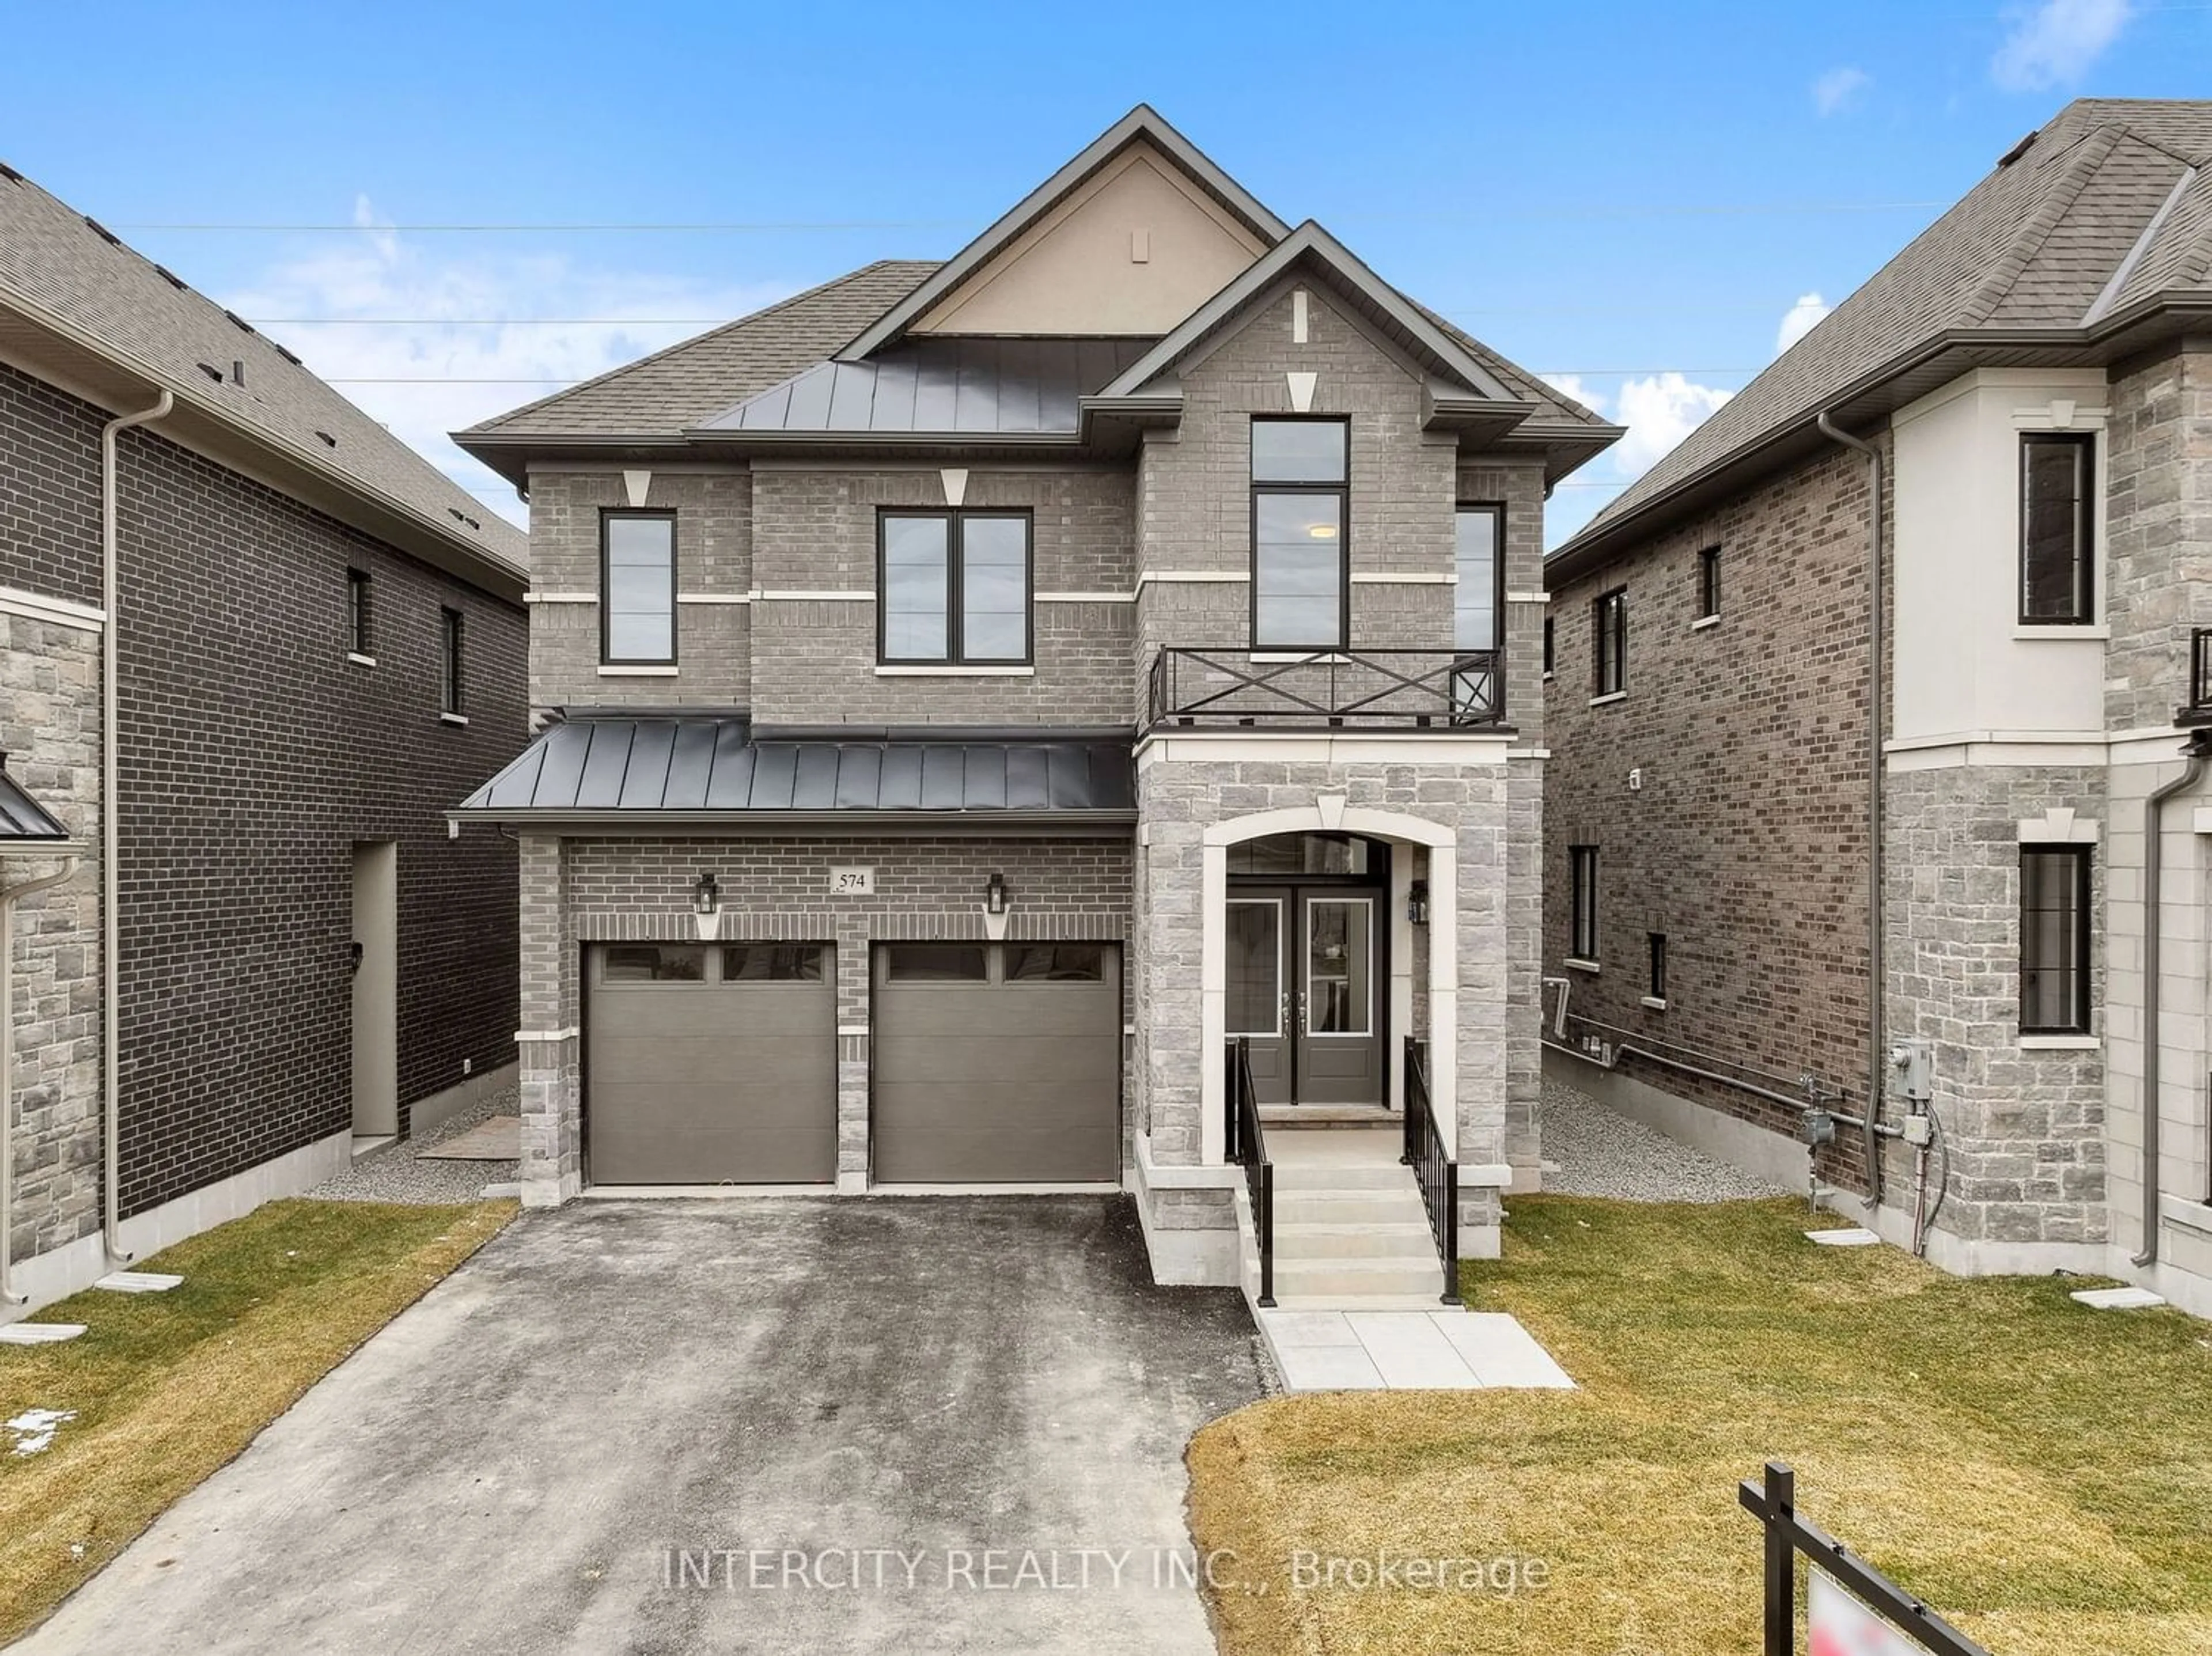 Home with brick exterior material for 578 Kleinburg Summit Way, Vaughan Ontario L4H 3N5